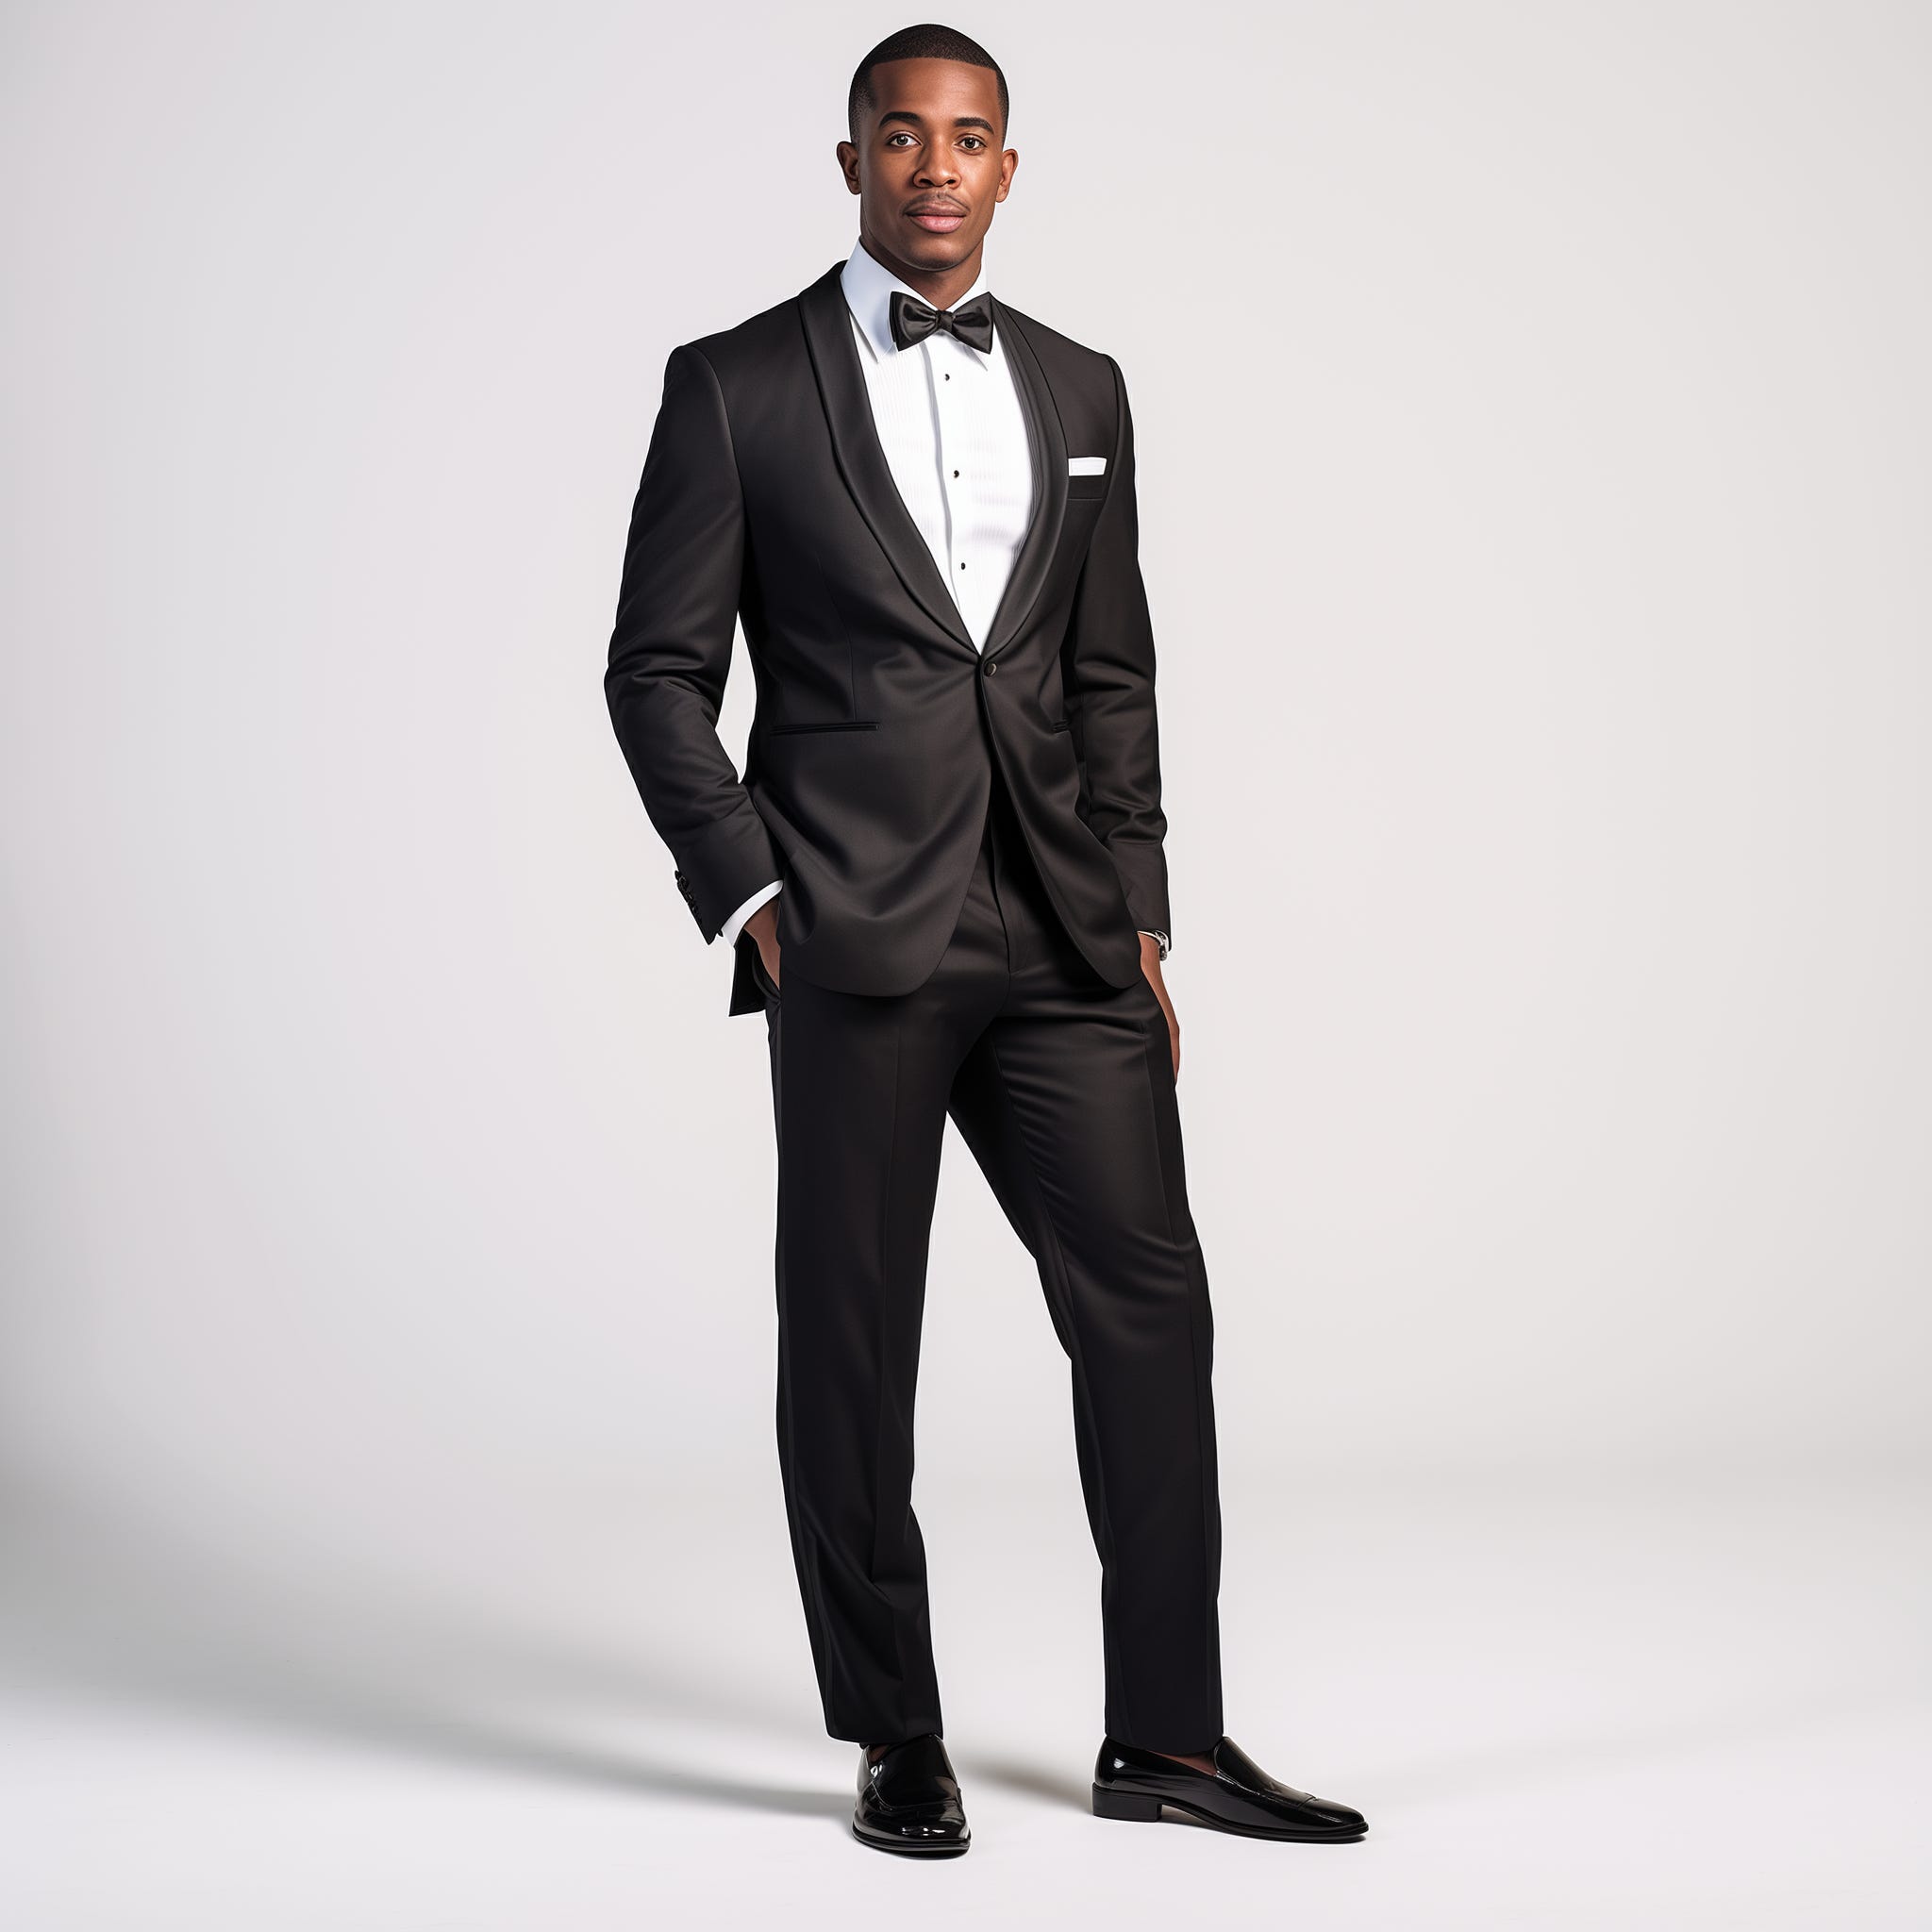 What to Wear: New Year's Eve Celebration